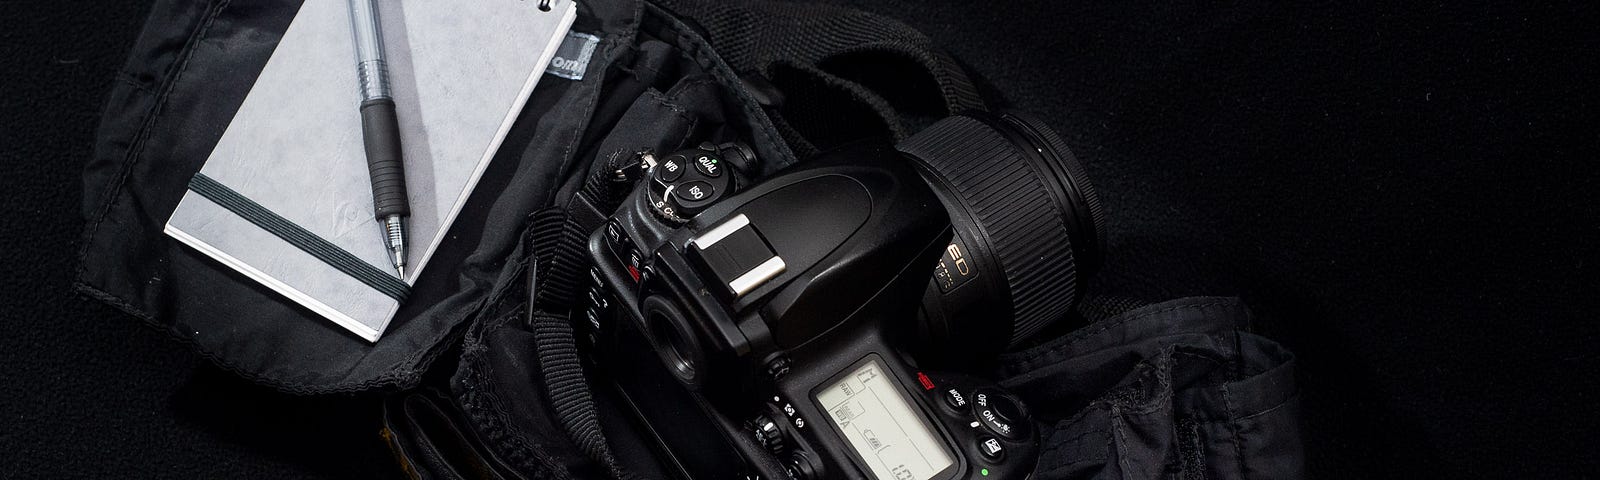 A display of a DSLR camera and a paper notebook sitting on a camera bag.